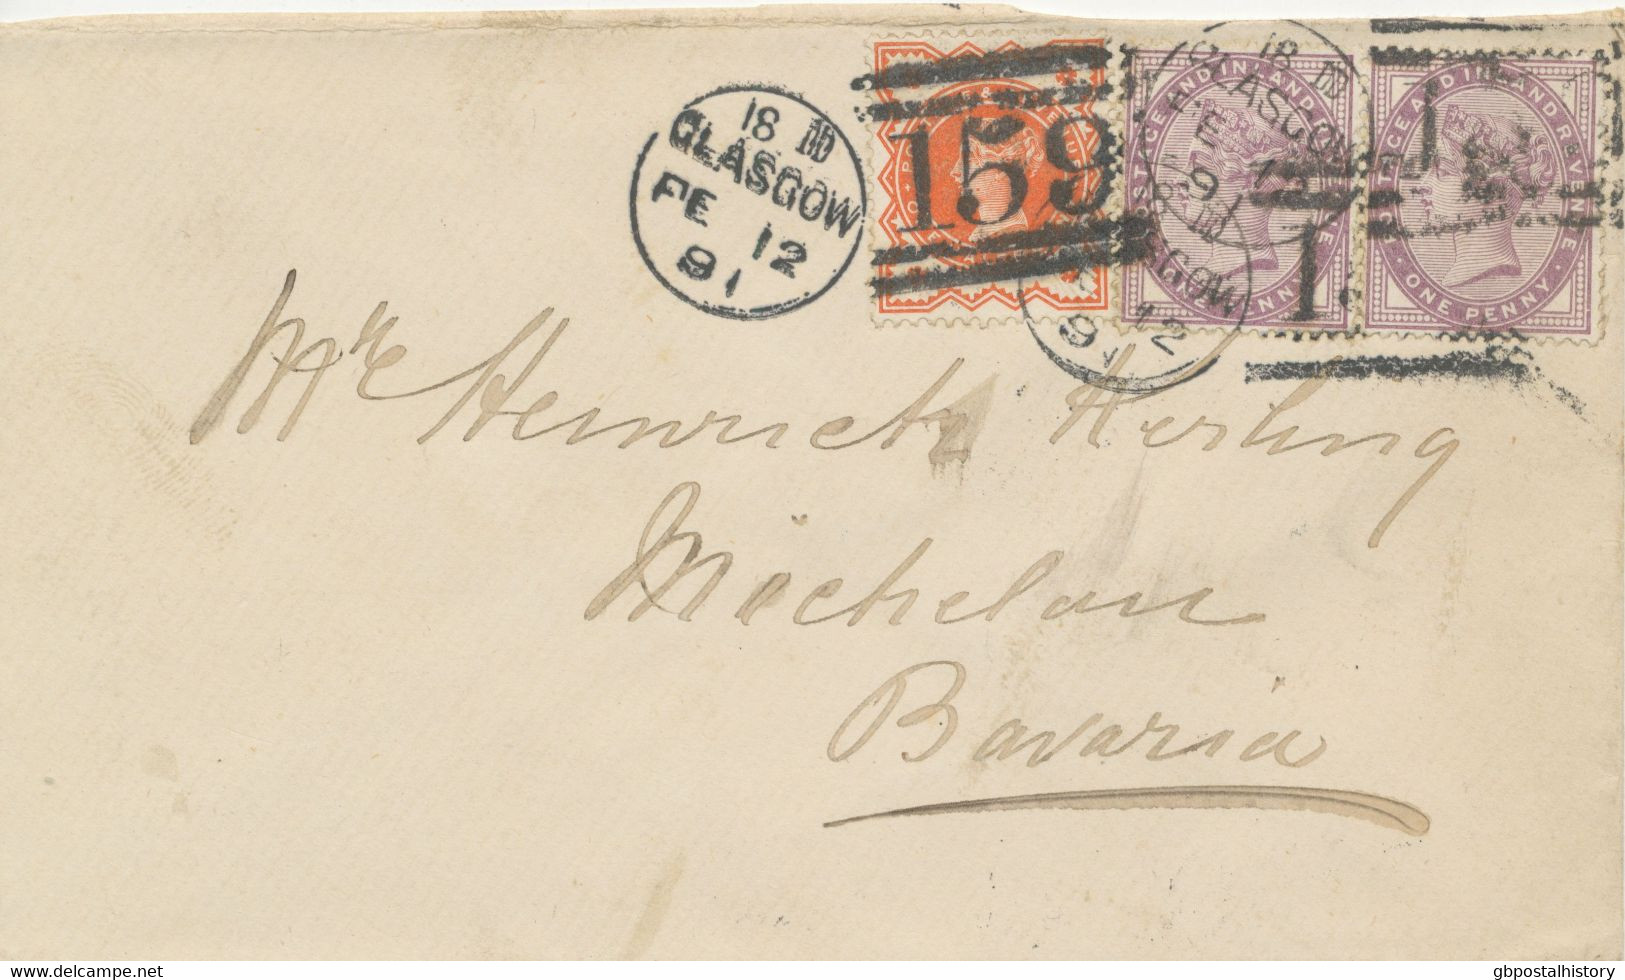 GB „159 / GLASGOW“ Scottish Duplex (4 Bars With Same Length, Rare Time Code „18 DD“, Datepart 19mm) On Superb Cover With - Briefe U. Dokumente